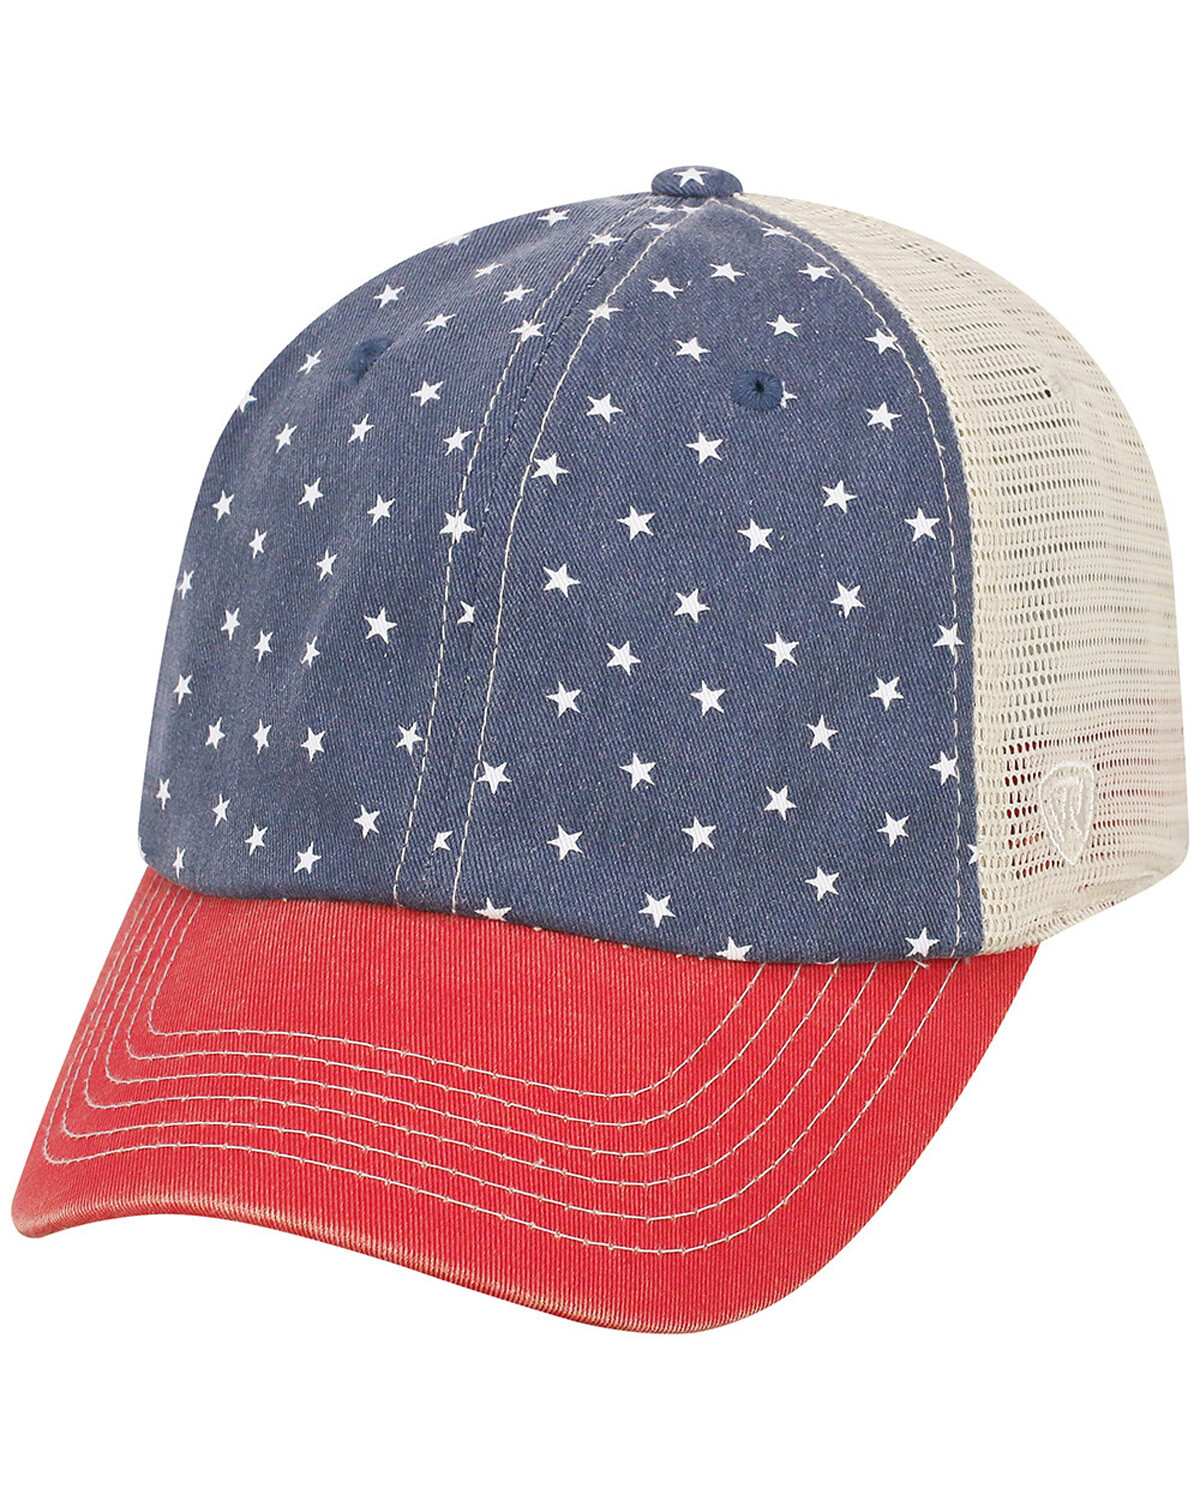 Top Of The World Adult Offroad Cap FREEDOM